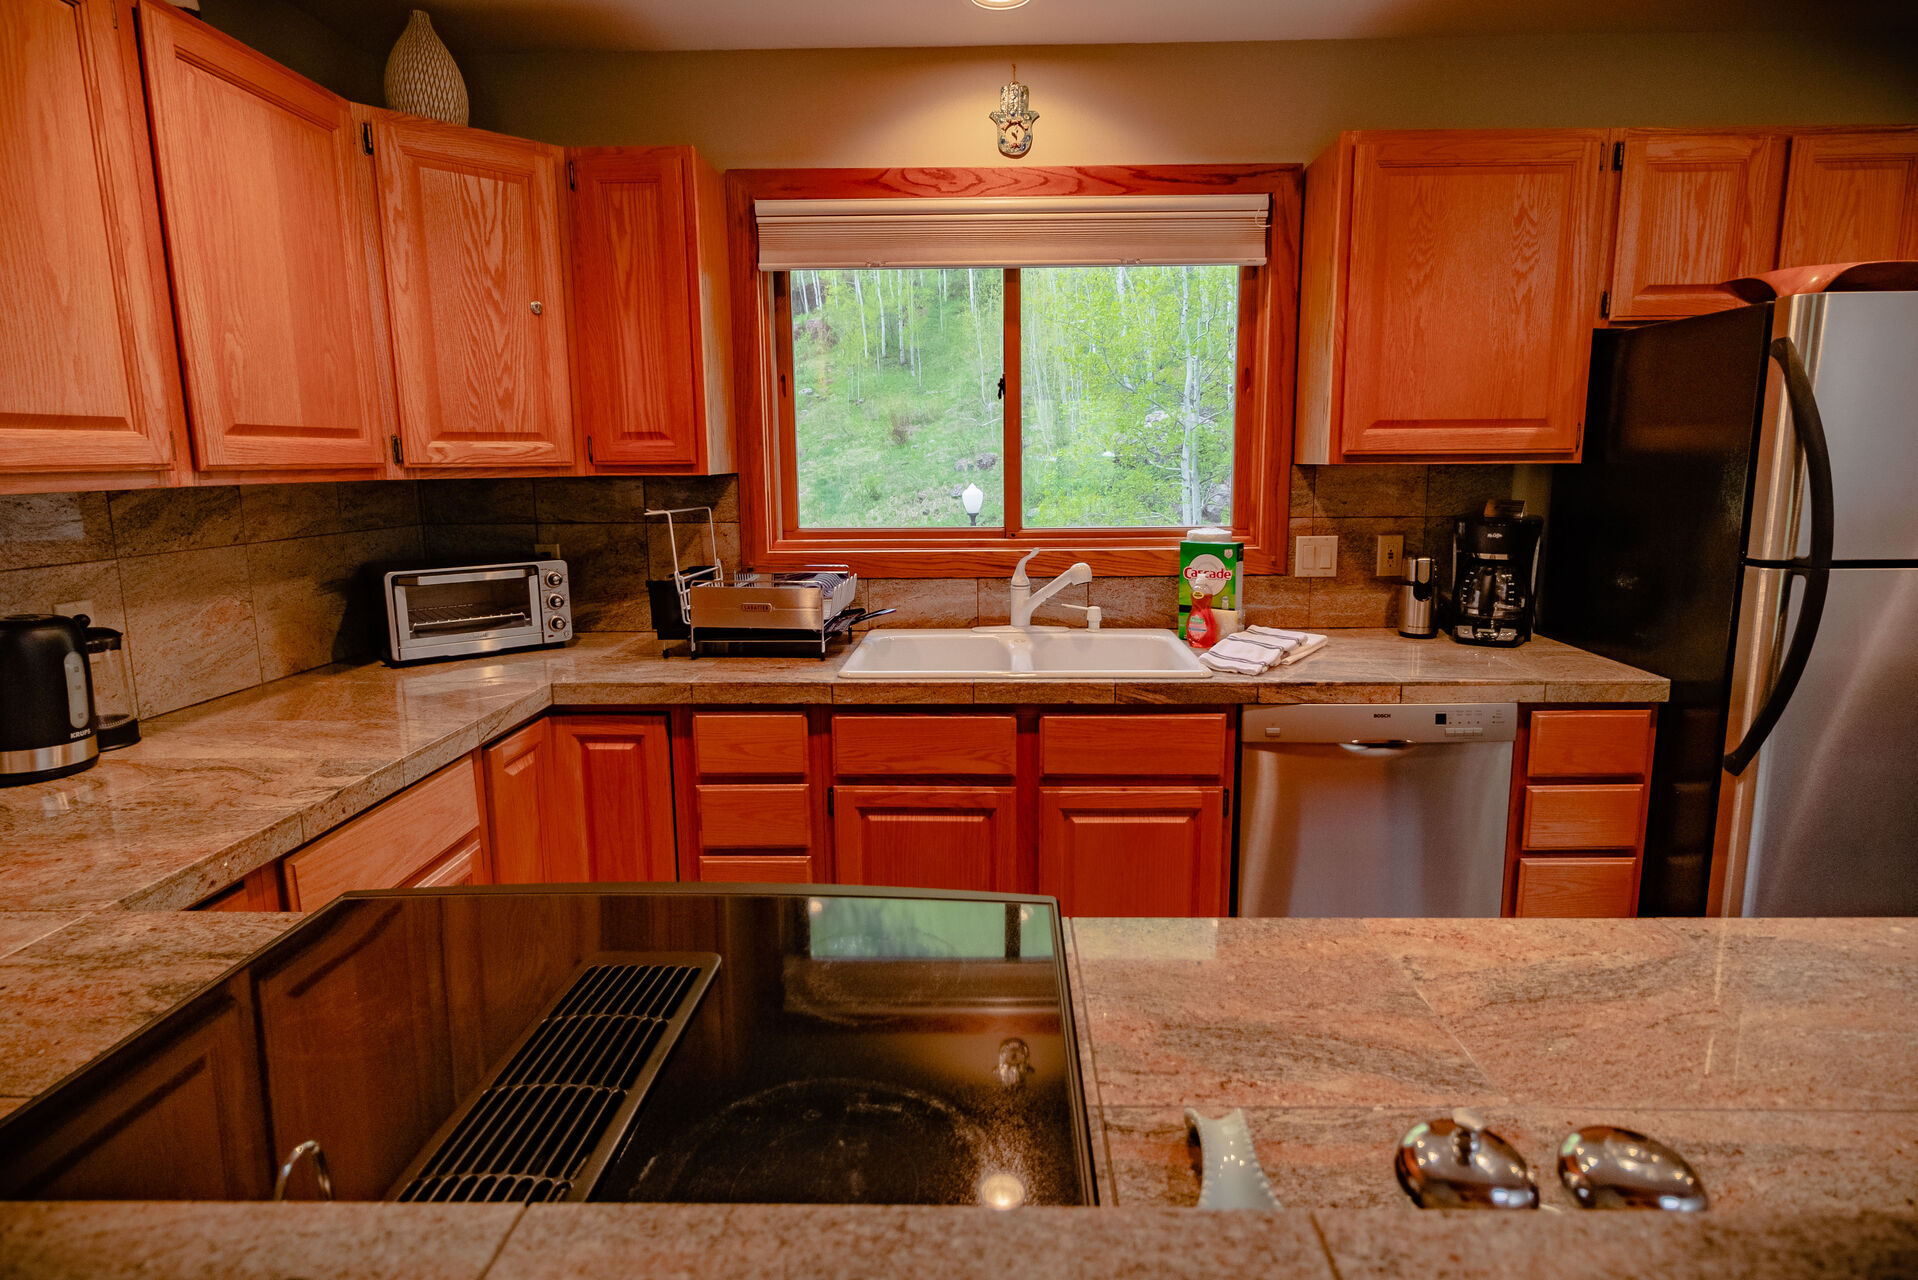 Full Kitchen with Wrap-Around Counter Tops and Stainless Steel Appliances at Colorado Vacation Cabin